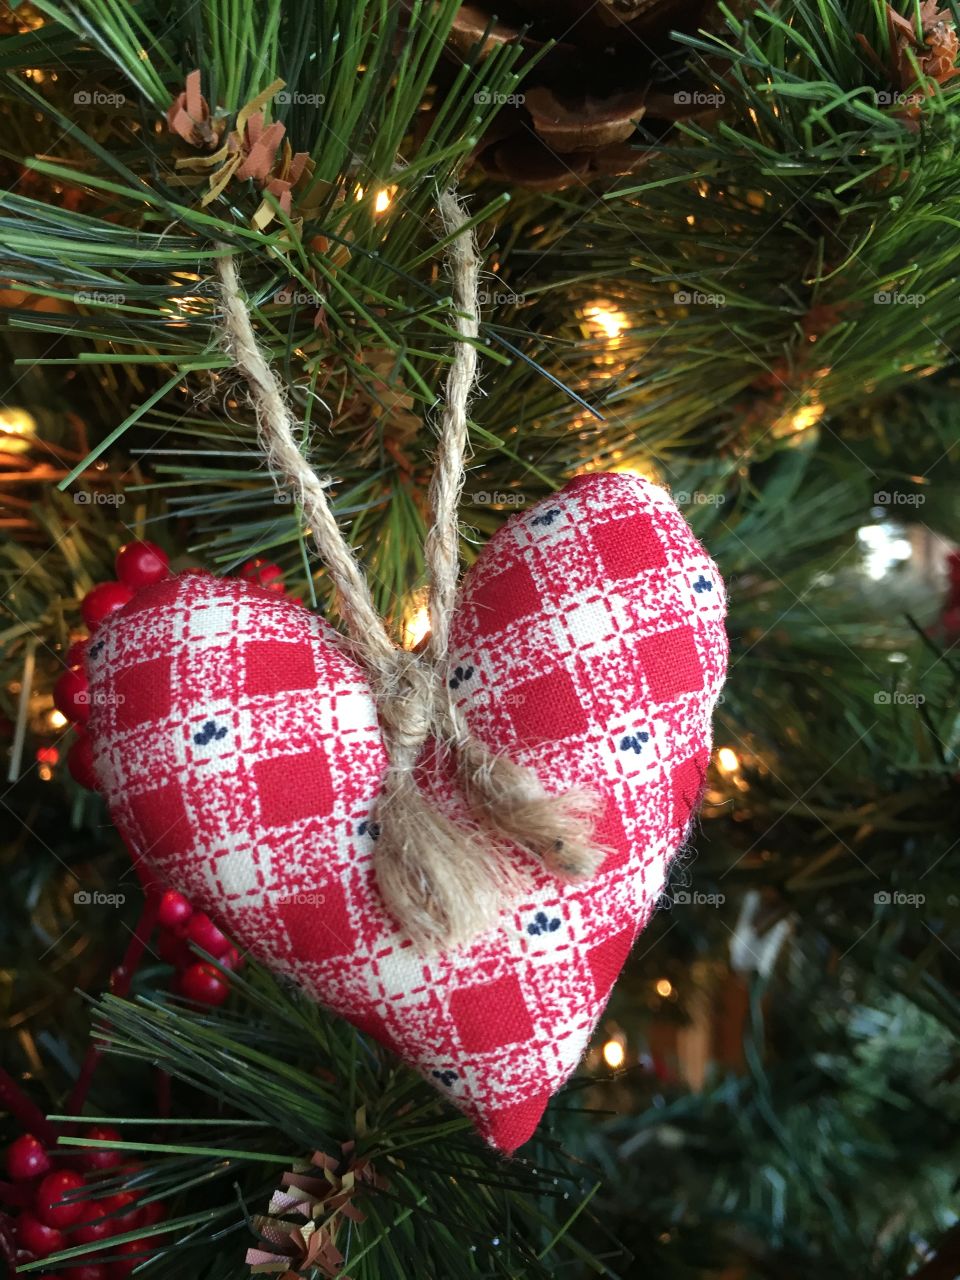 🎄 Red Heart on Christmas Tree. 🎄🎄 Merry Christmas to all.🎄🎄